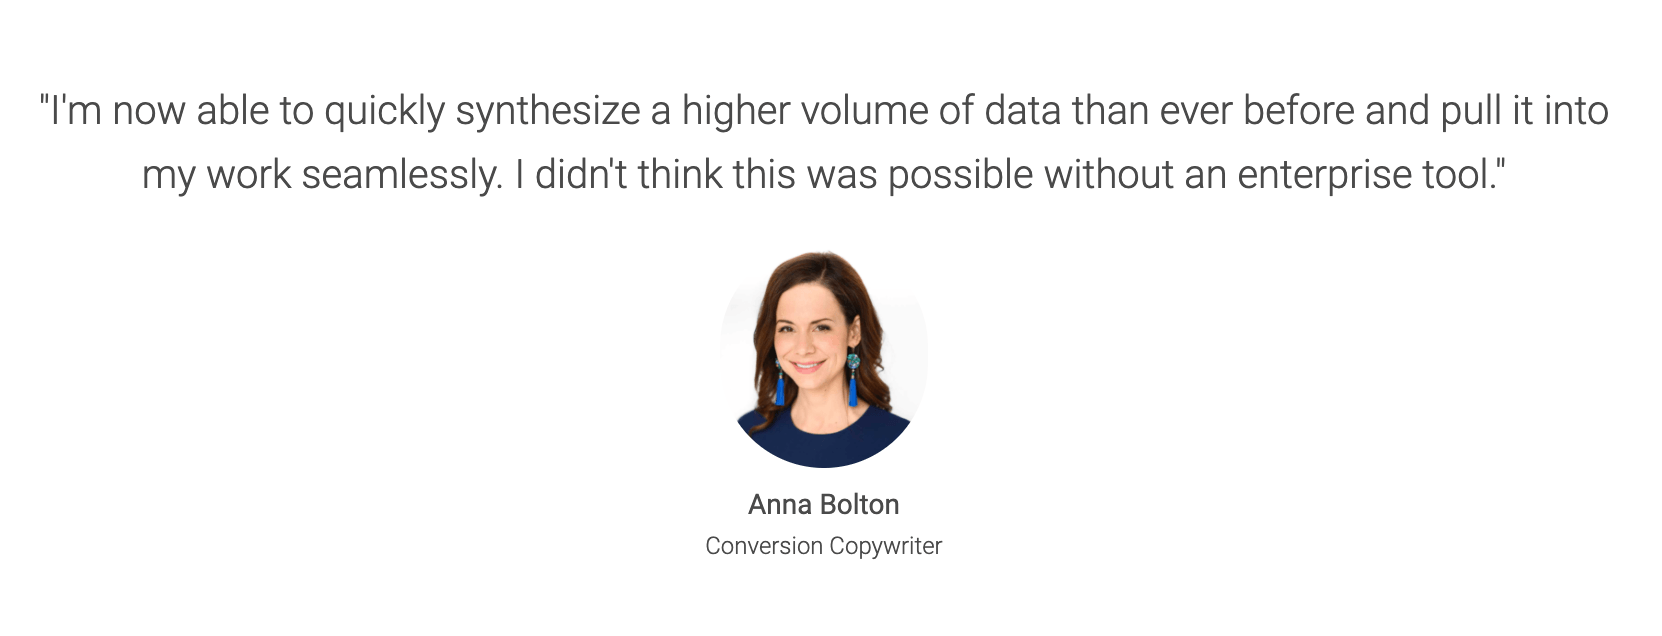 Aurelius customer testimonial: I'm now able to quickly synthesize a higher volume of data than ever before and pull it into my work seamlessly. I didn't think this was possible without an enterprise tool.